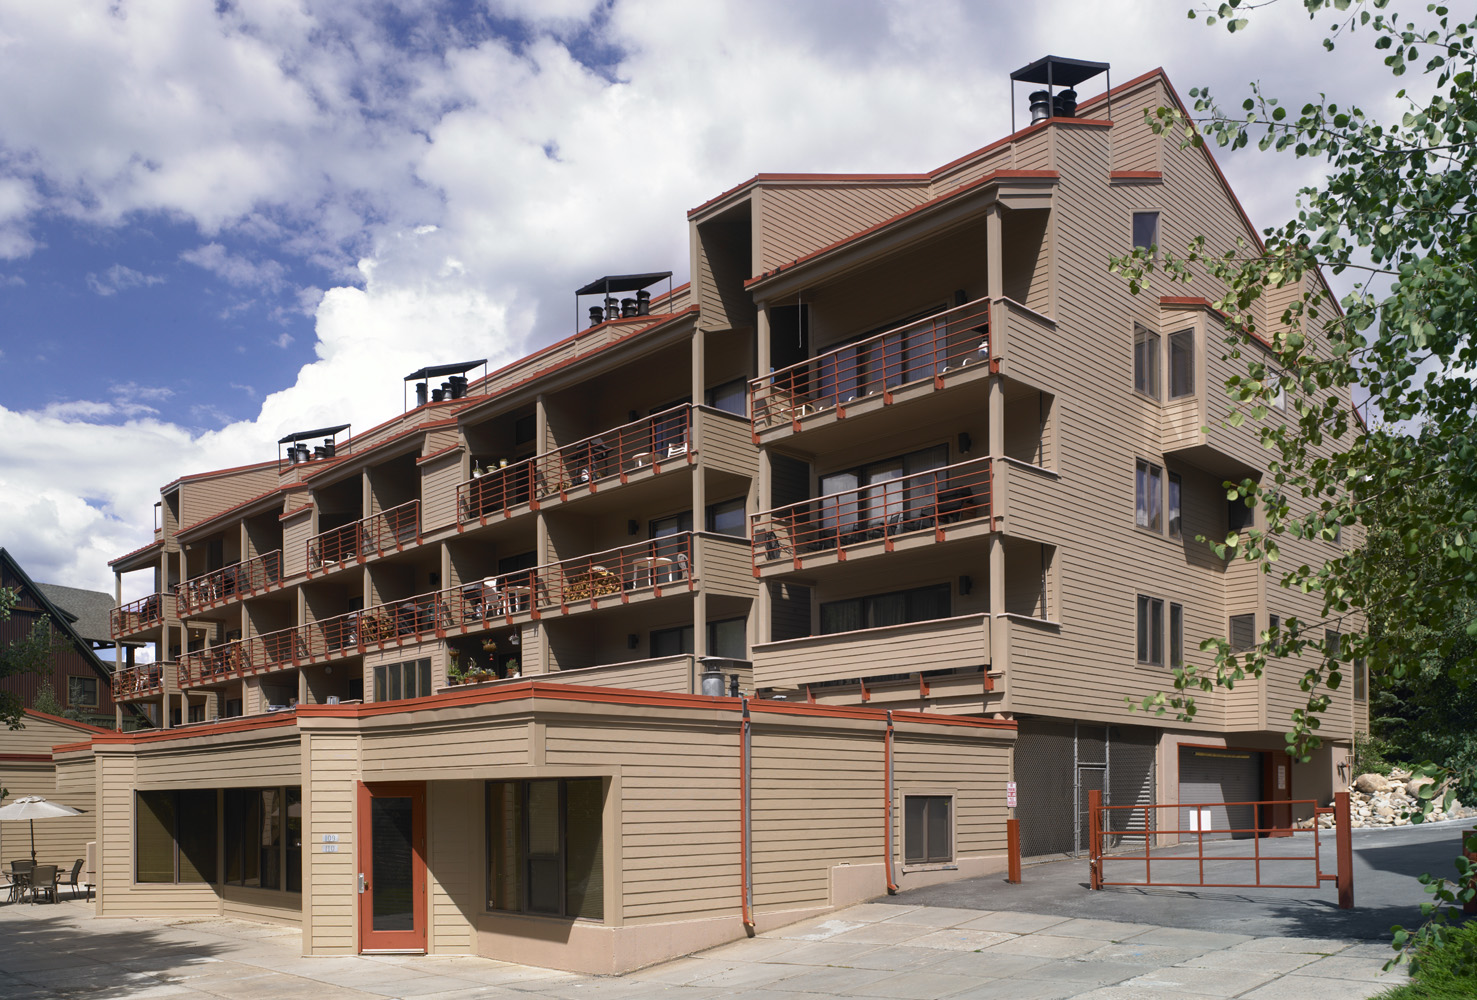 Colorado Multi-Family Property Re-Sided with James Hardie ColorPlusSiding